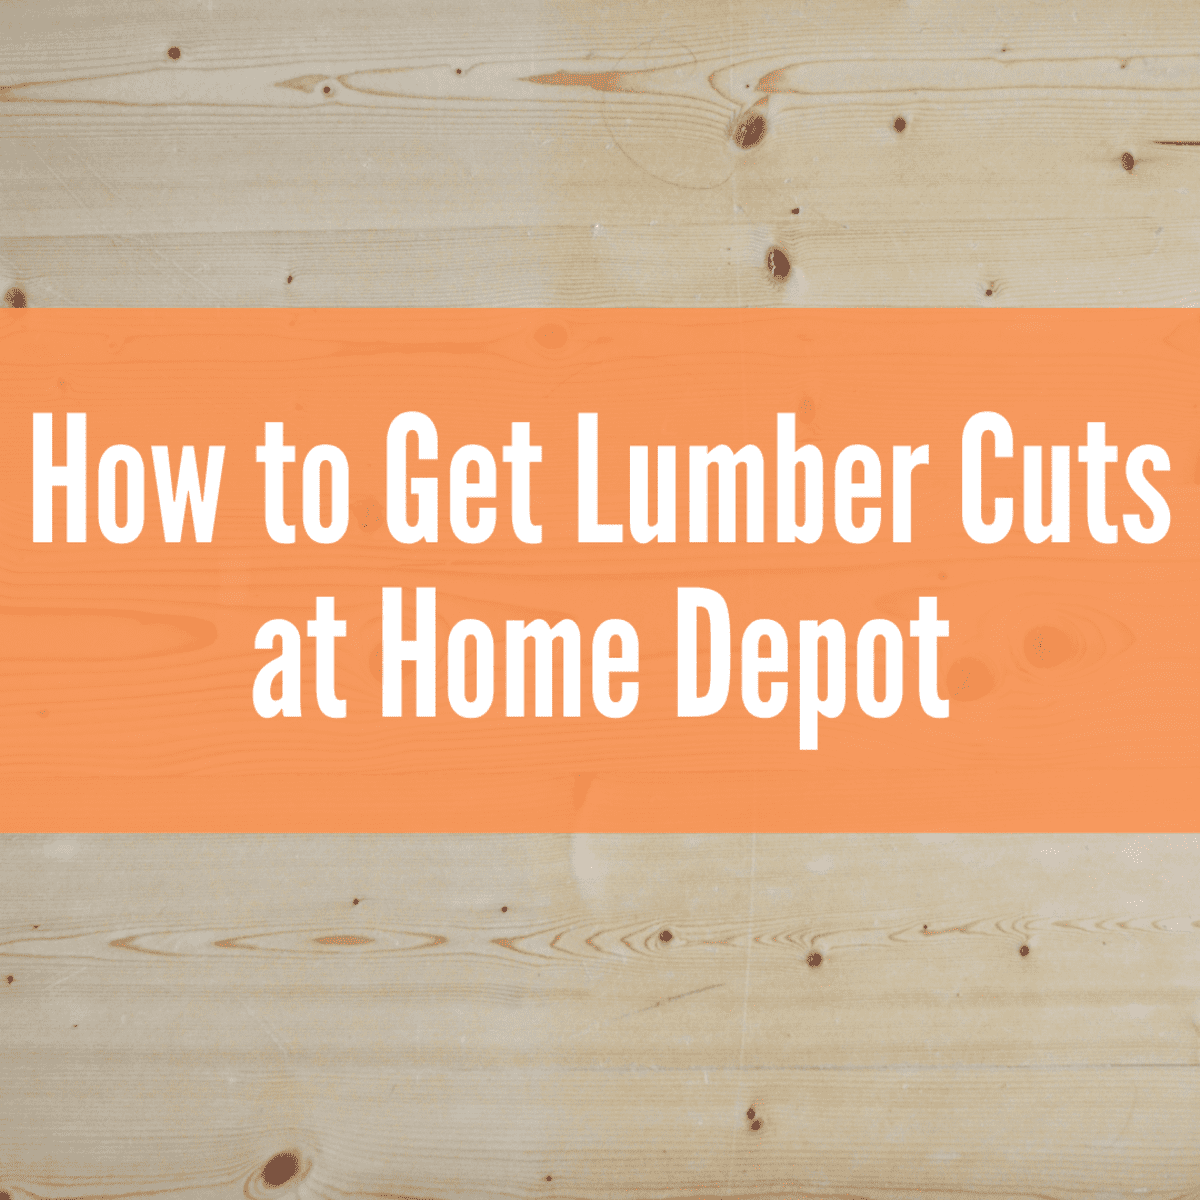 Will Home Depot Or Lowes Cut Wood For You?: Get Crafting!